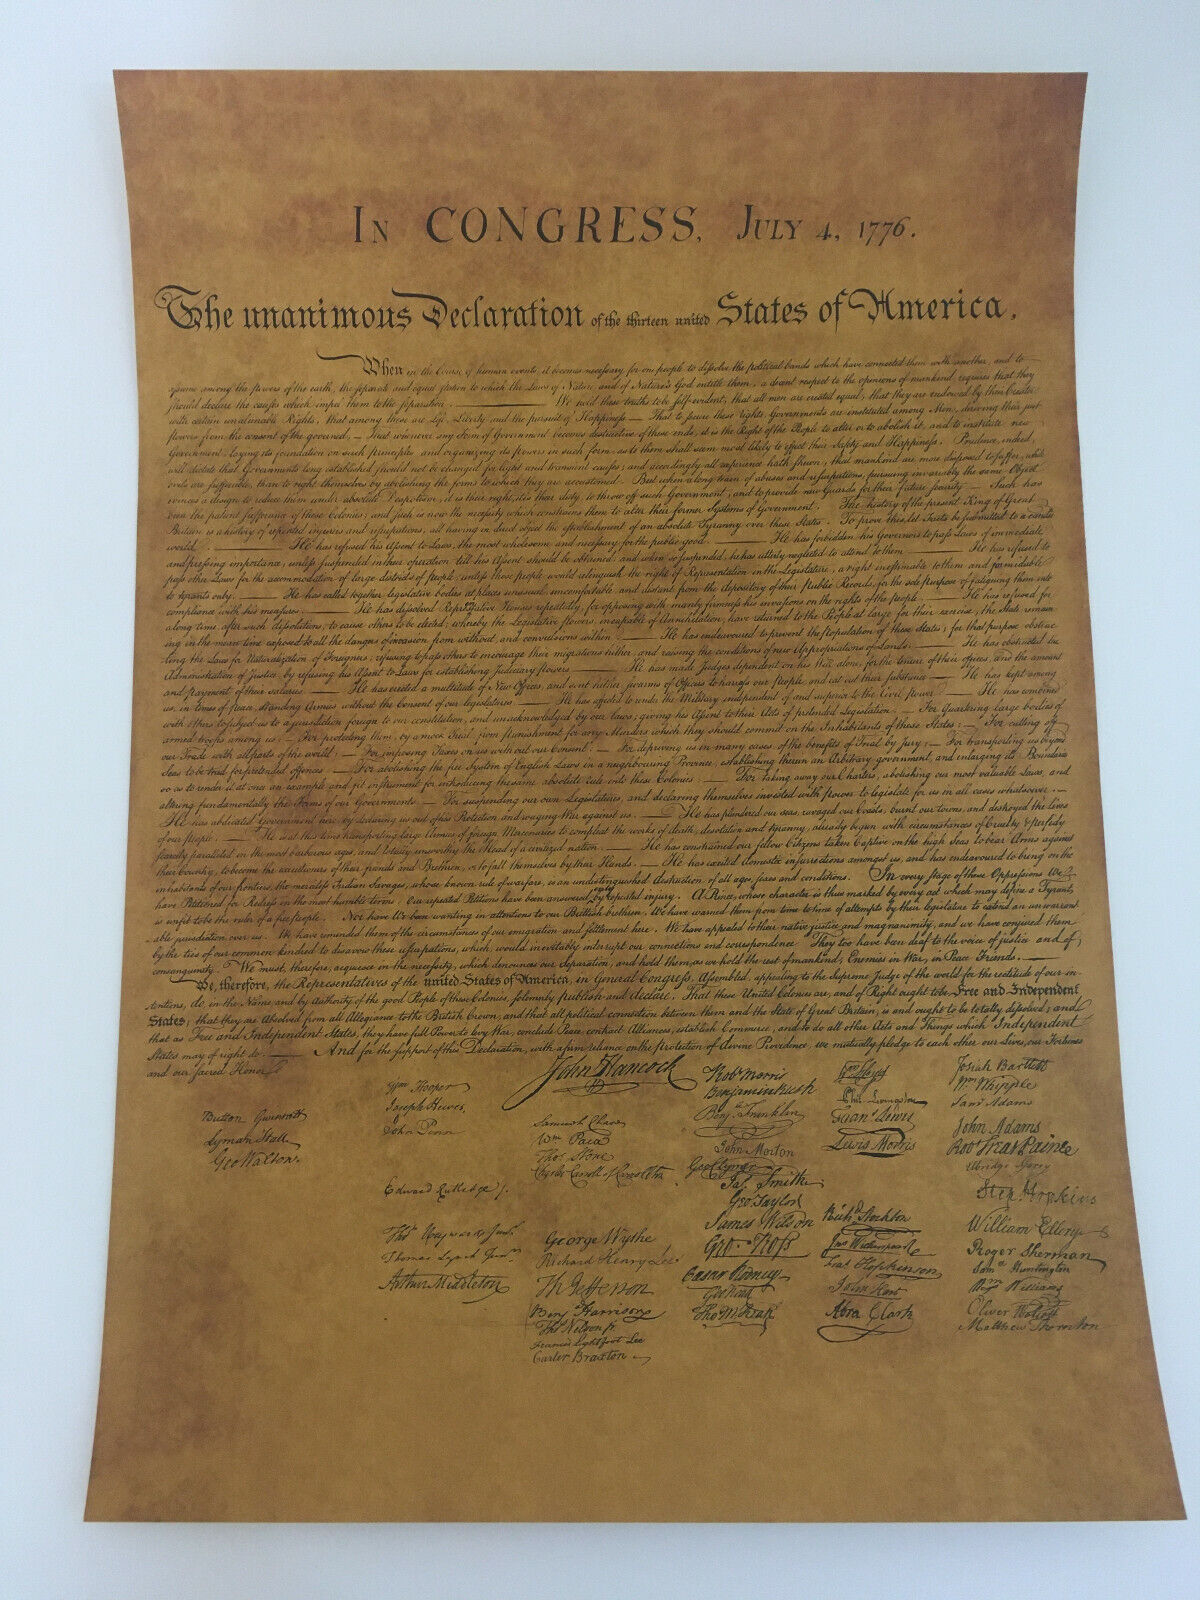 Declaration of Independence America Poster Replica US History